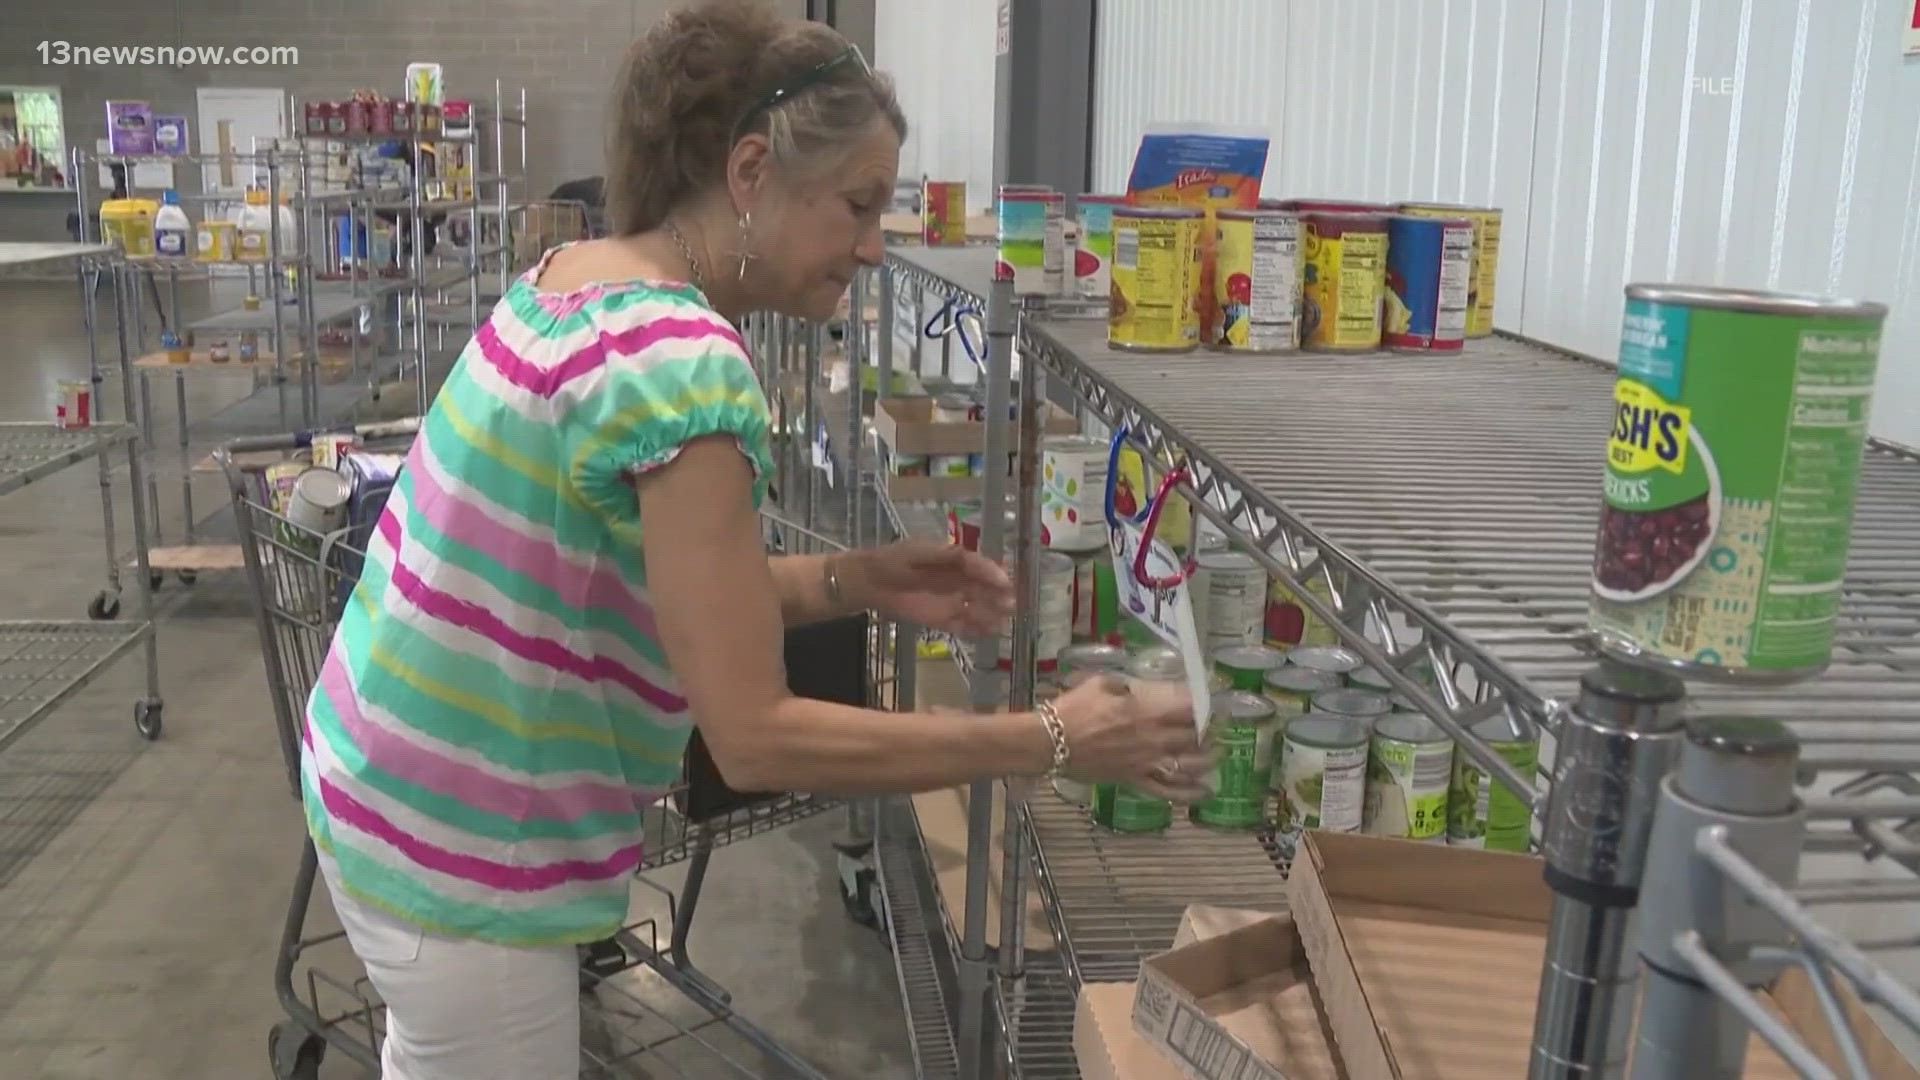 Local food banks continue to see an increase in need and donations are down after the holidays.